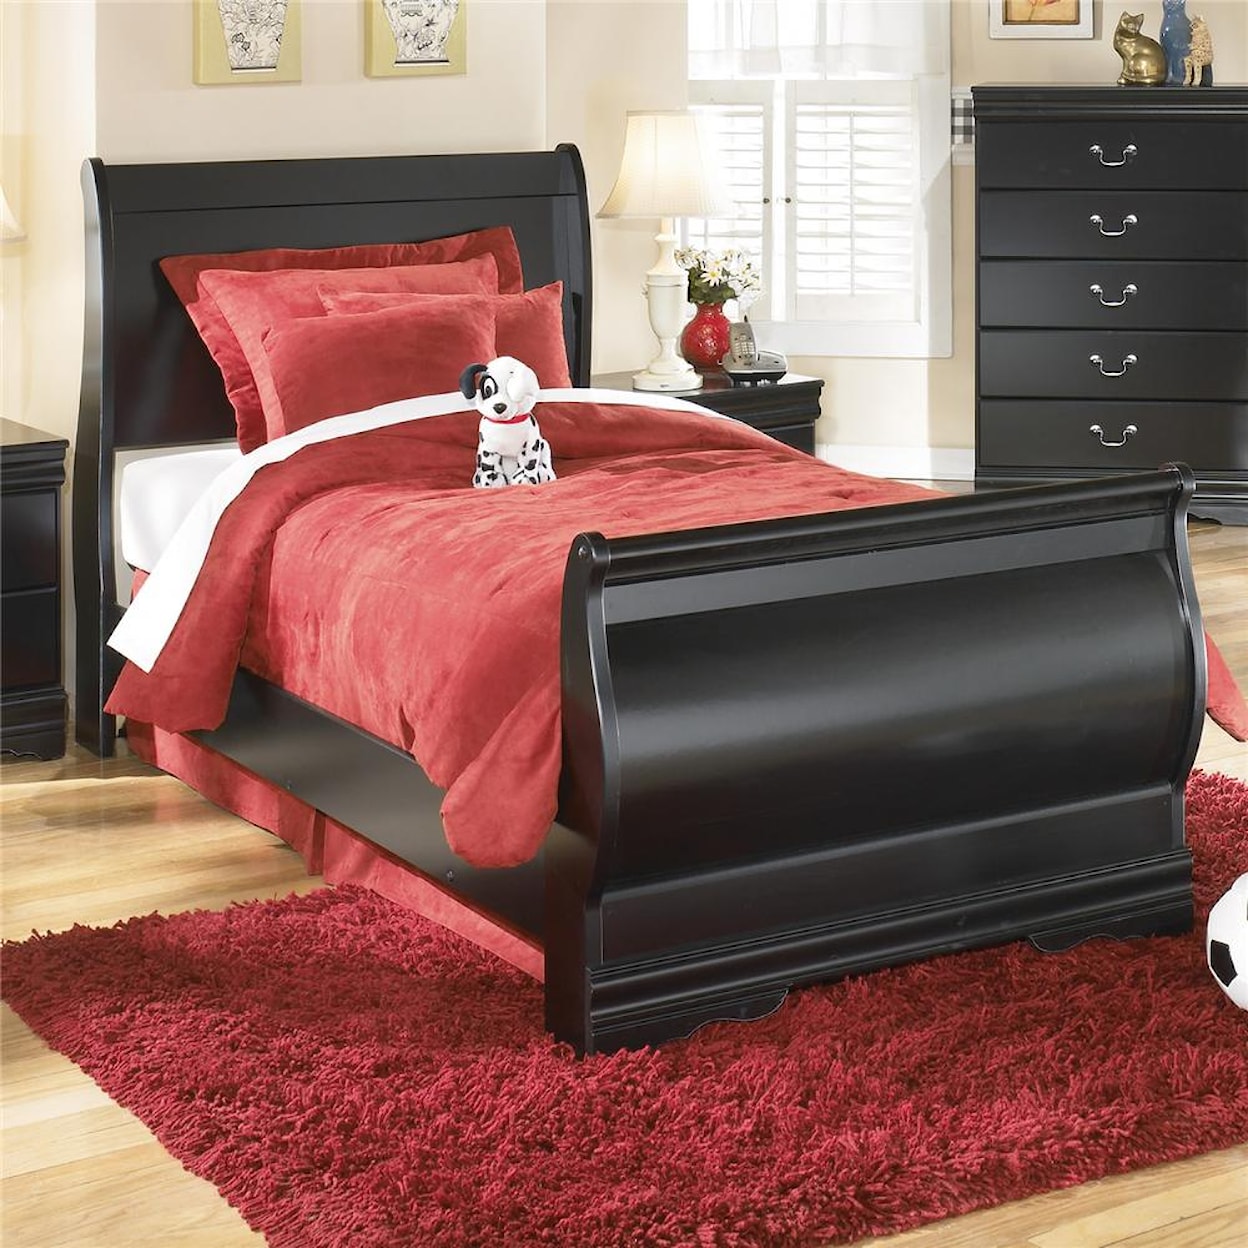 StyleLine Rome Twin Sleigh Bed